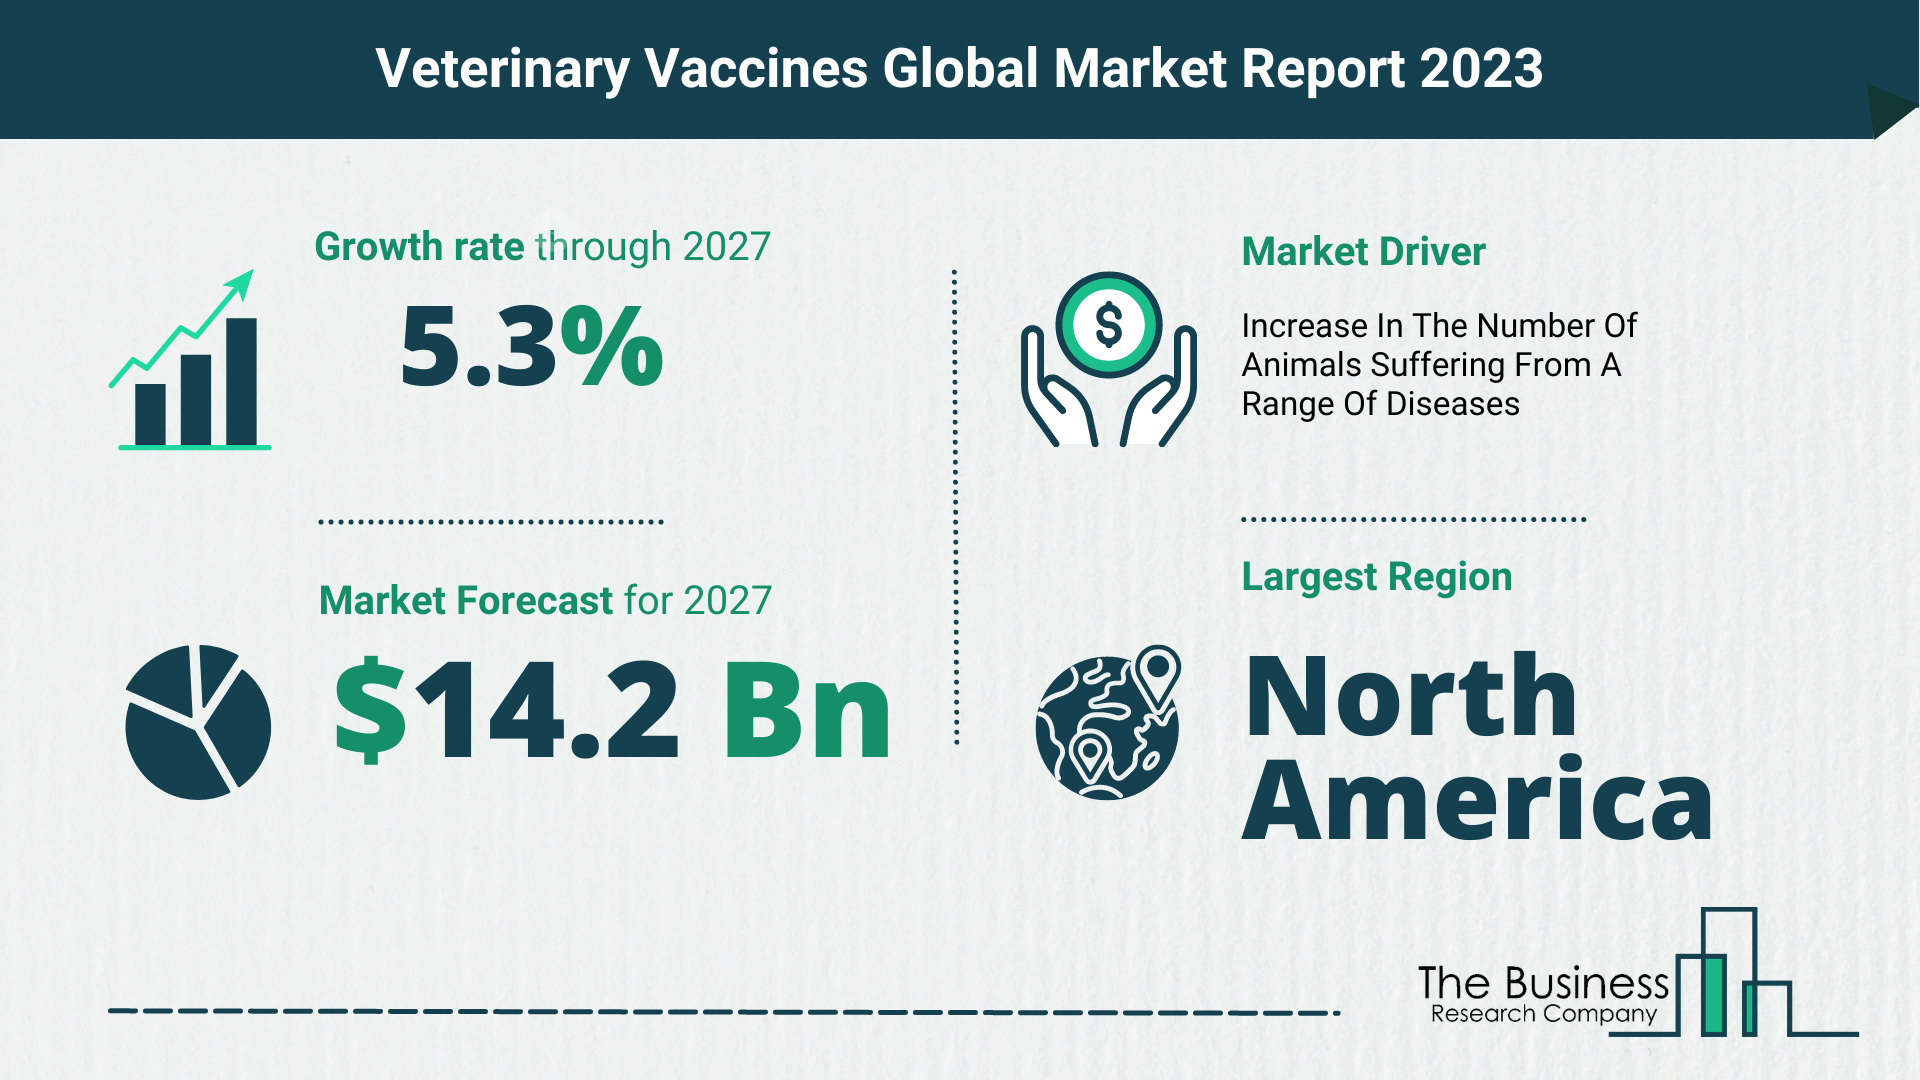 What Will The Veterinary Vaccines Market Look Like In 2023?